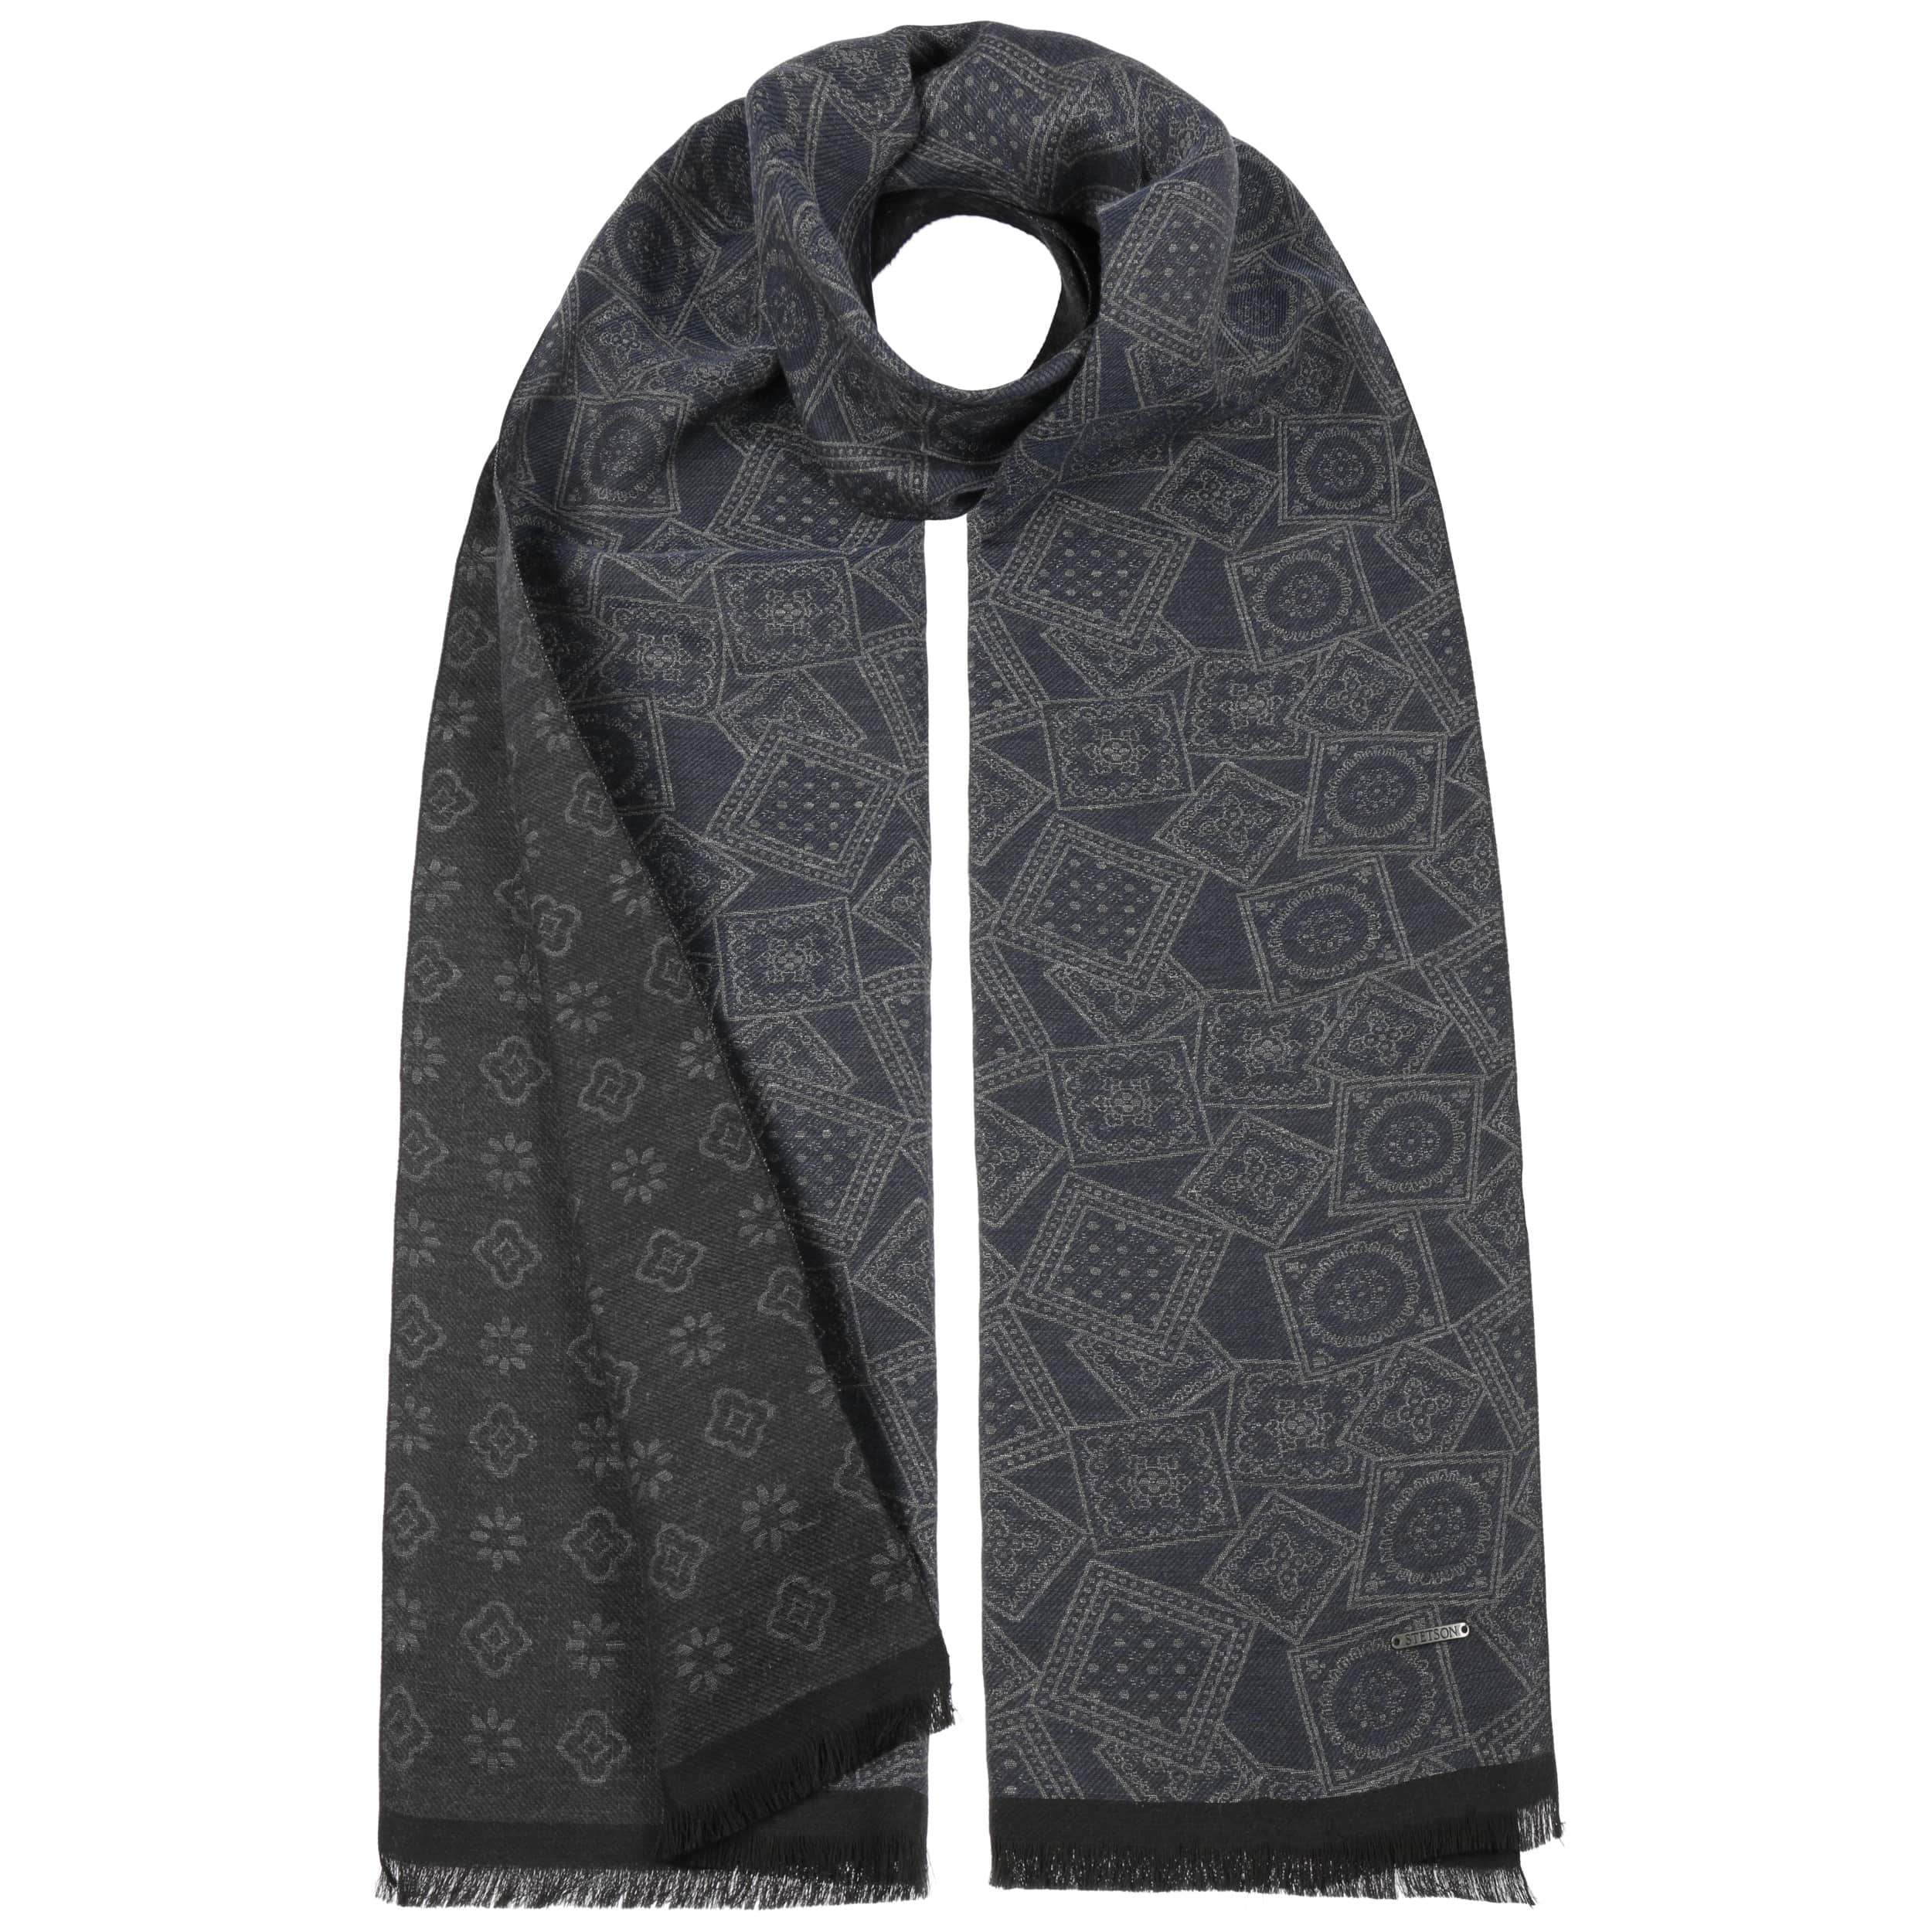 Jacquard Stamps Cotton Scarf by Stetson - 79,00 €